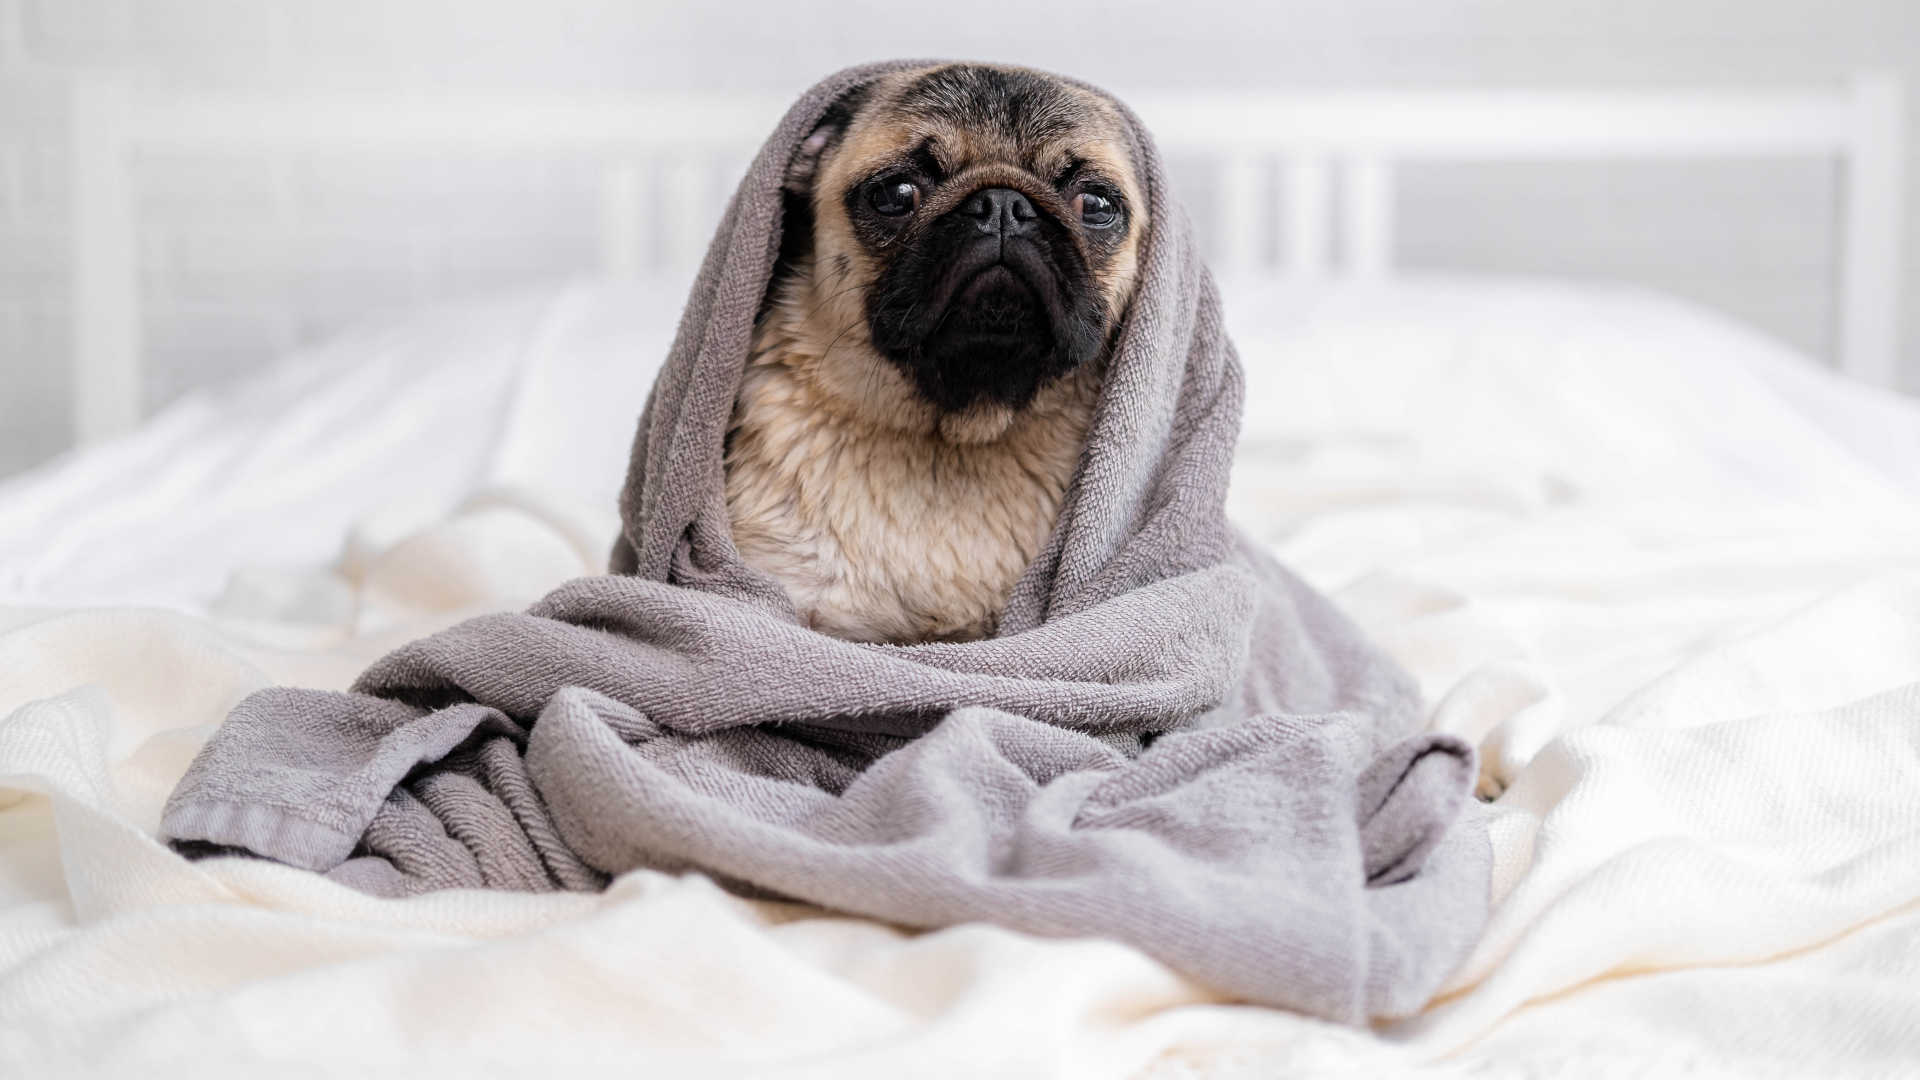 Wash pet bedding – Small dog wrapped in a blanket